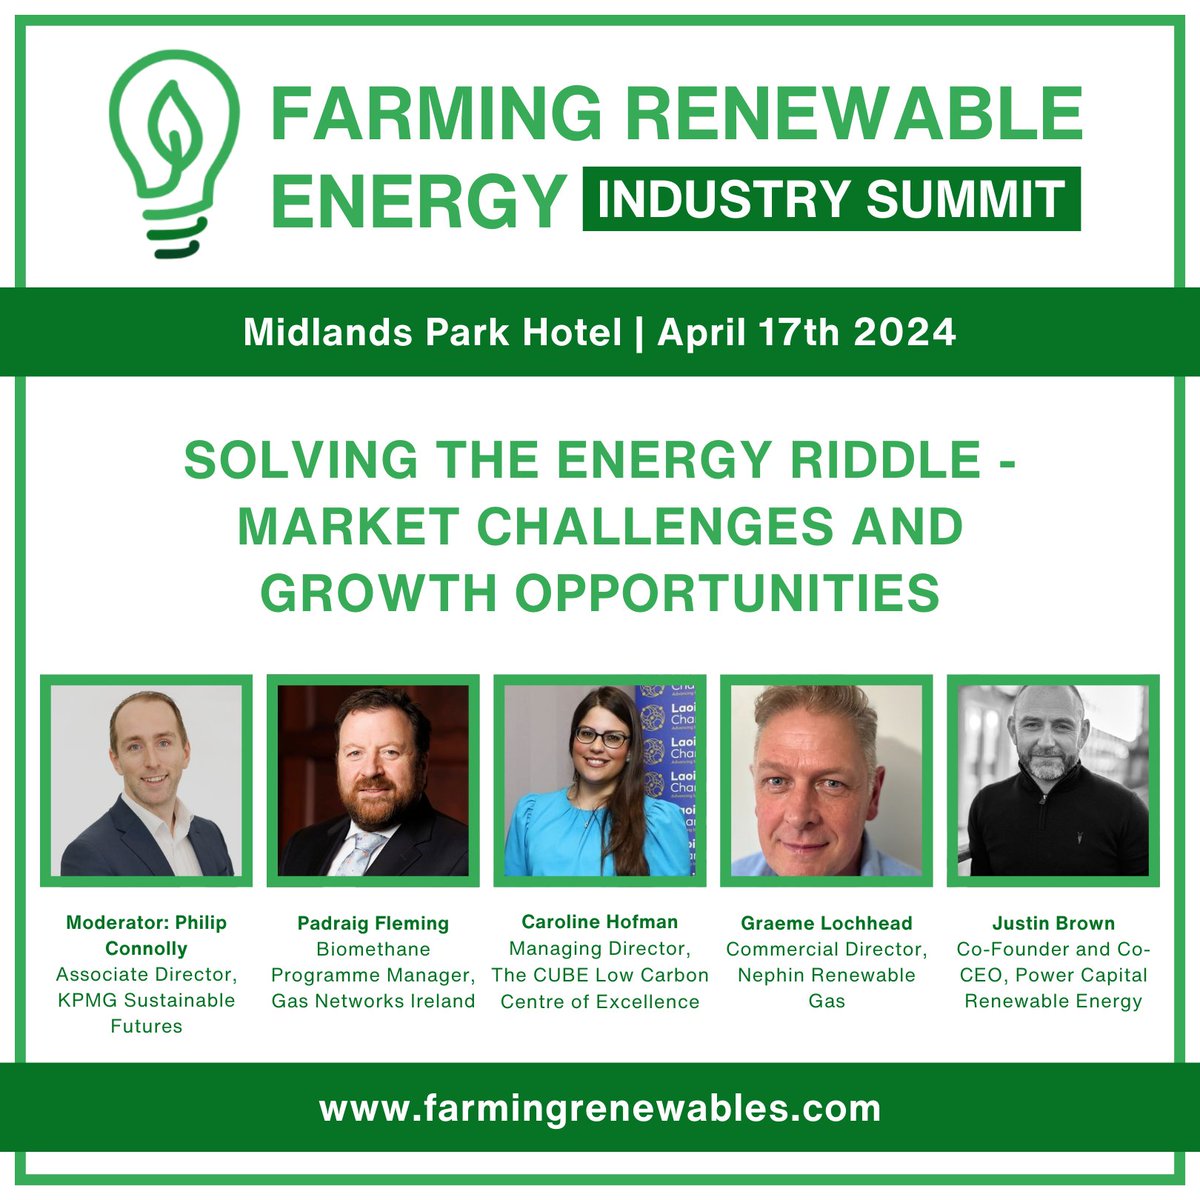 Taking place TOMORROW ⌛ and new speaker Caroline Hofman @CearuilinH added! Solving the Energy Riddle - Market Challenges and Growth Opportunities To learn more about this event, visit farmingrenewables.com Register here: eventbrite.ie/e/farming-rene… #FRSummit24